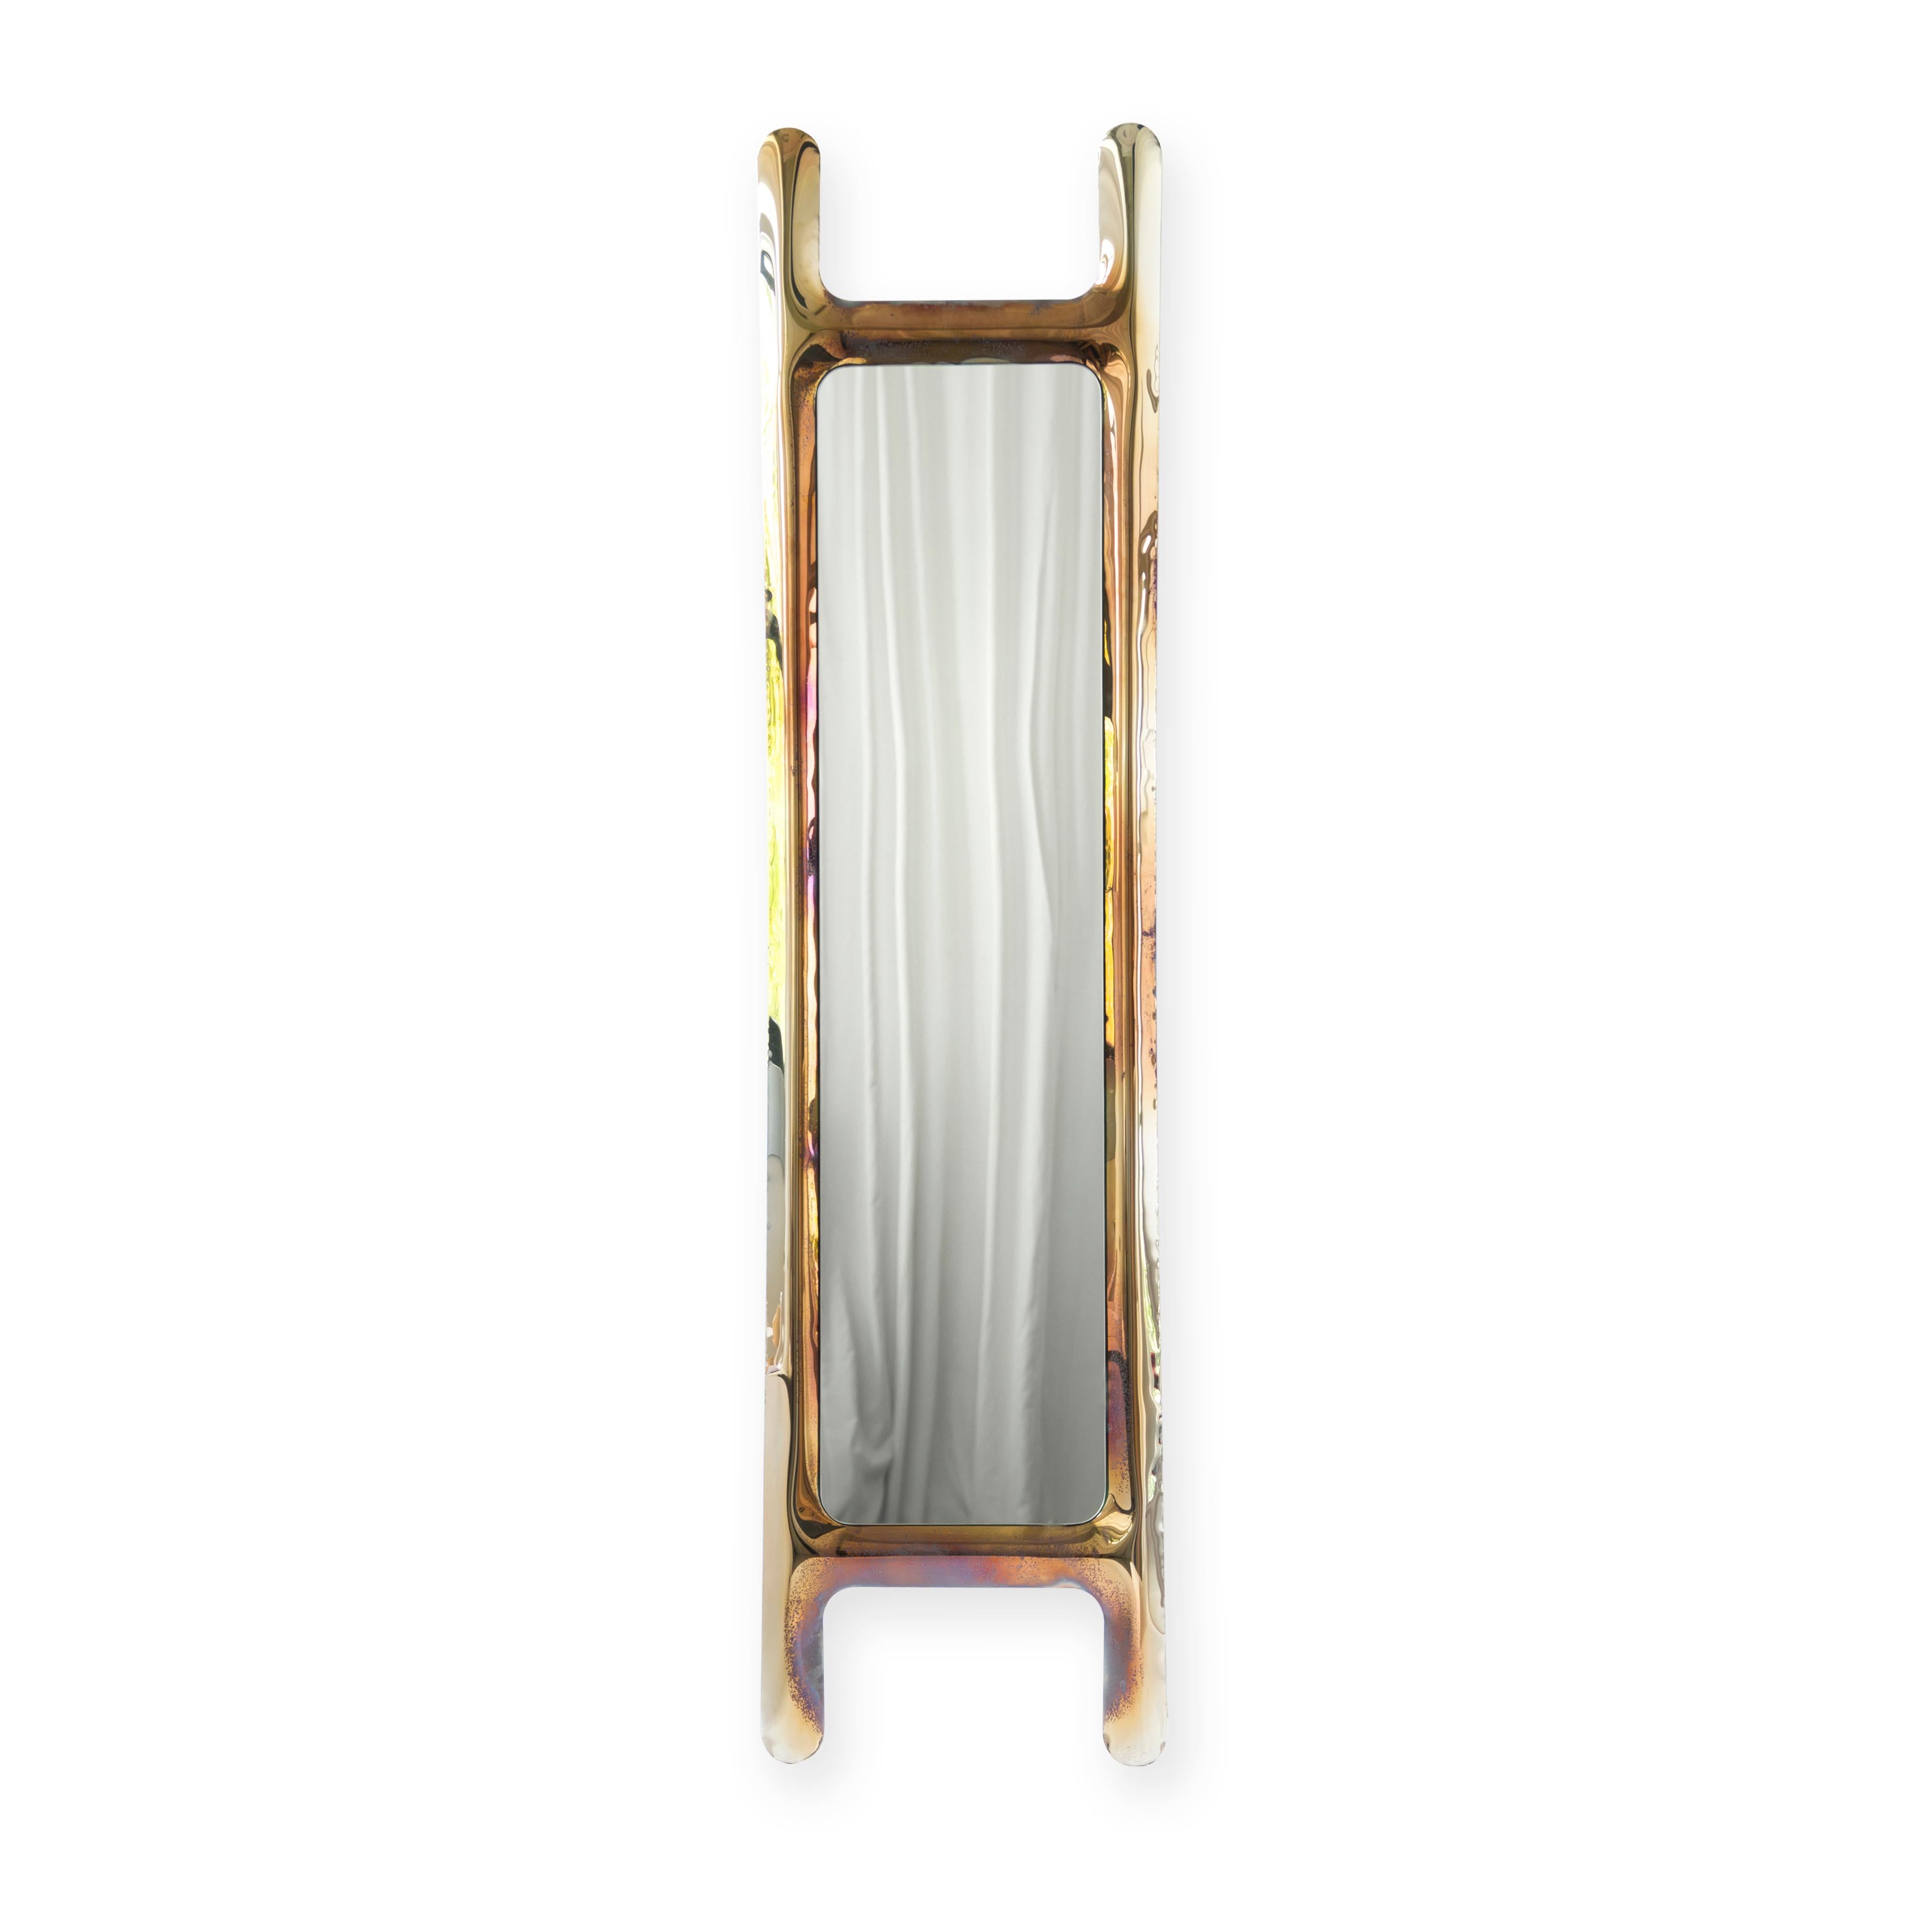 Contemporary Mirror 'Drab' by Zieta, Flamed Gold In New Condition For Sale In Paris, FR